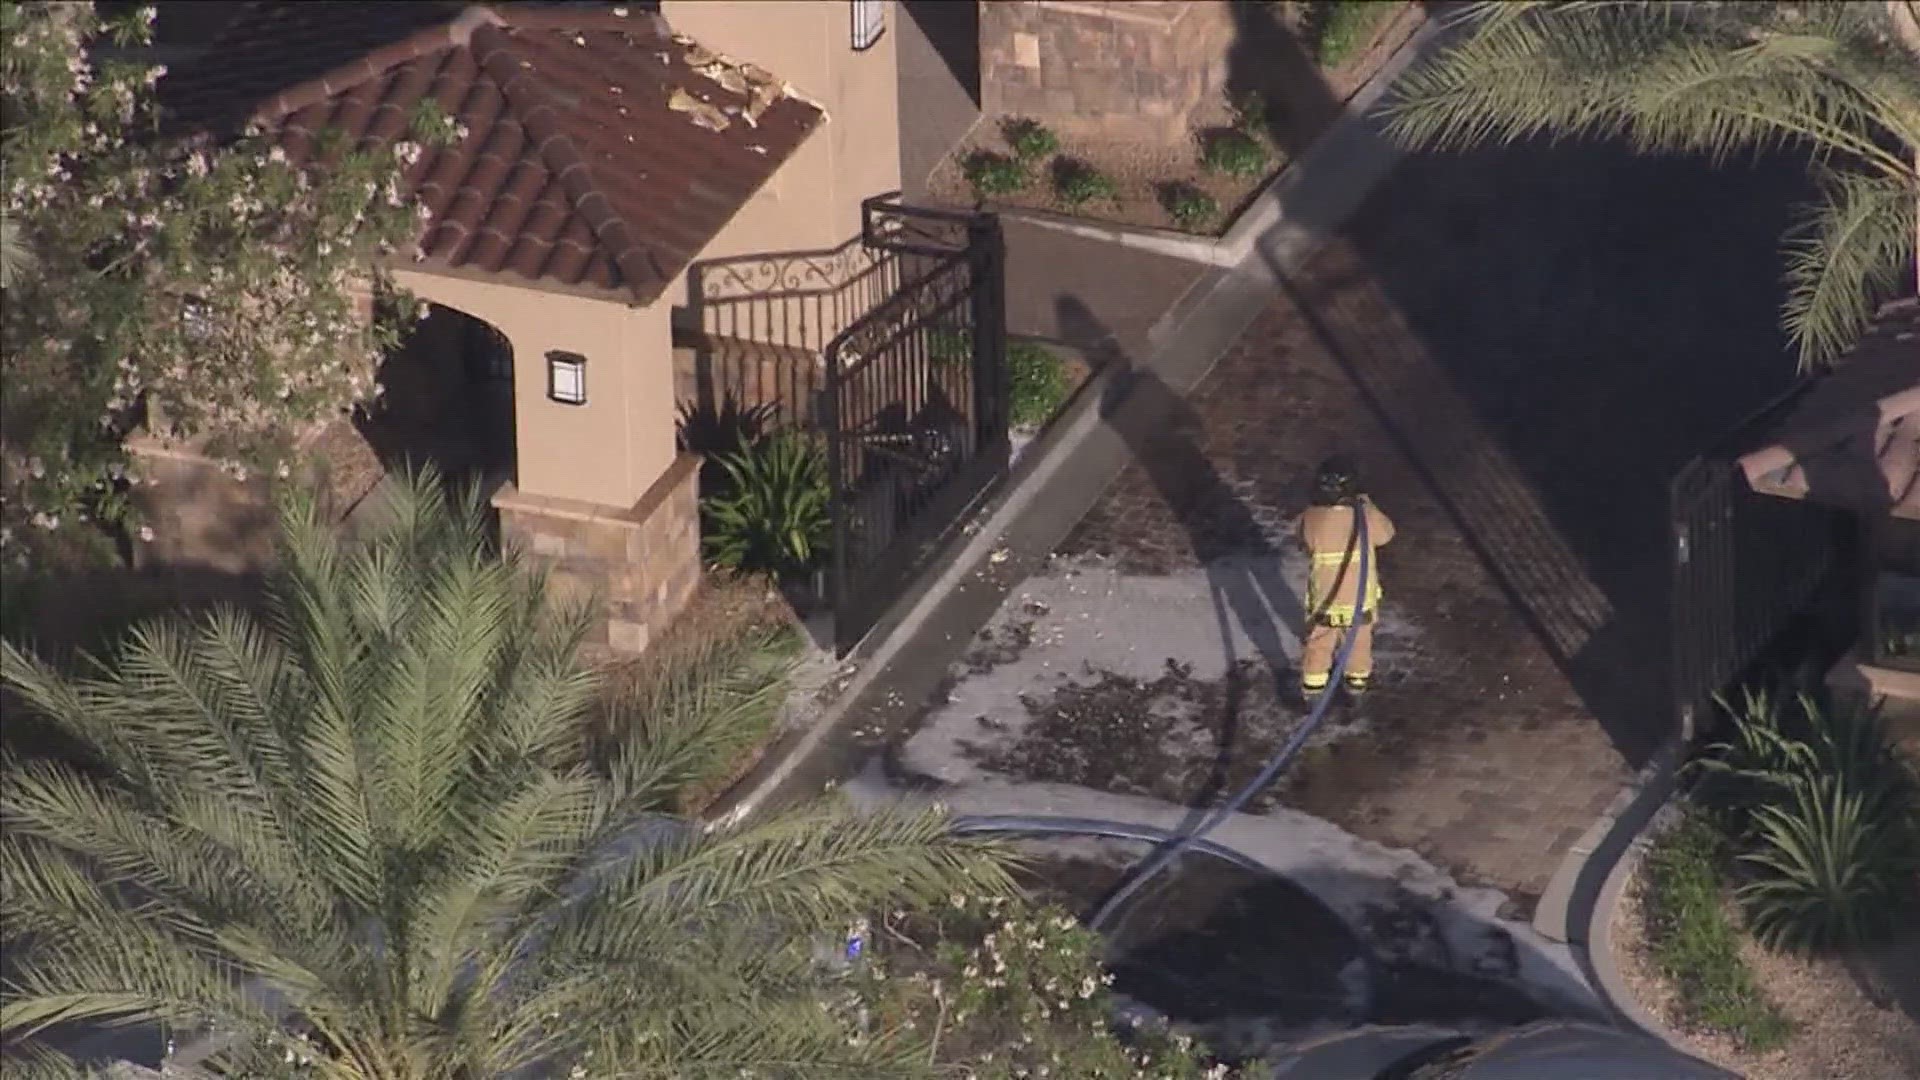 Three people, including a Phoenix firefighter, had to be taken to the hospital after being stung by a swarm of bees near Scottsdale Road and Pinnacle Peak Wednesday.